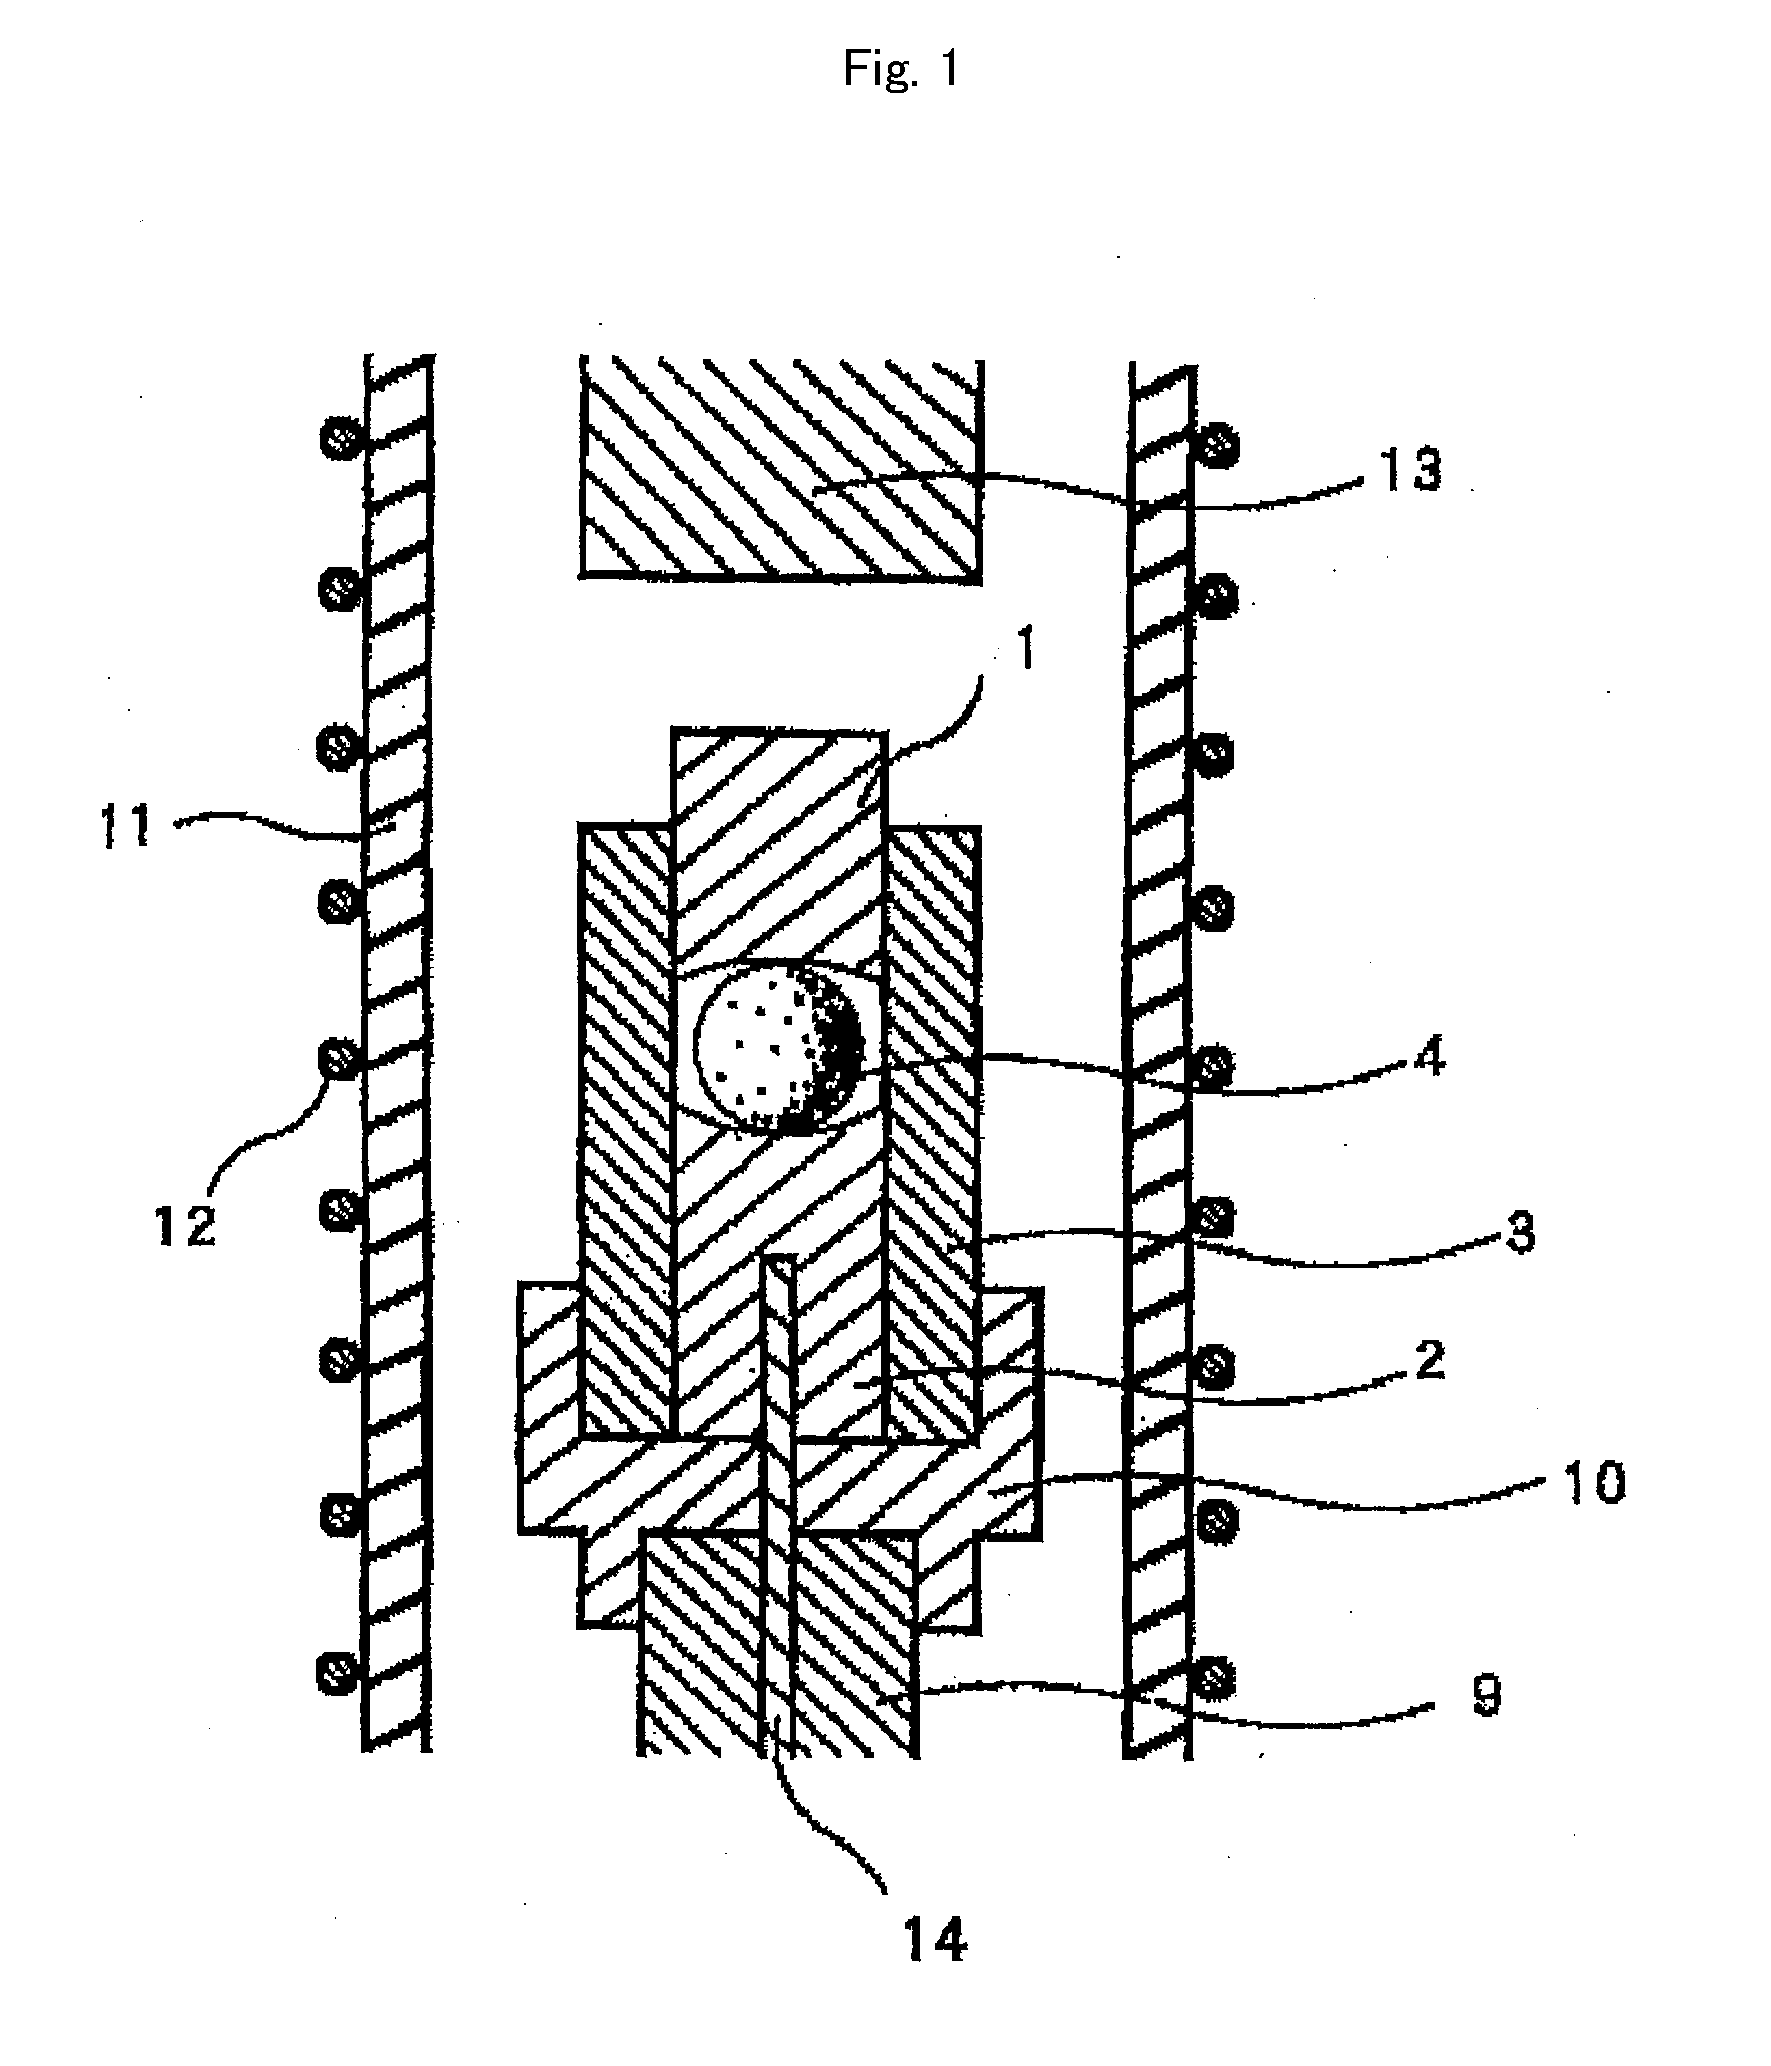 Optical glass, preform for press forming, optical element, and processes for producing these